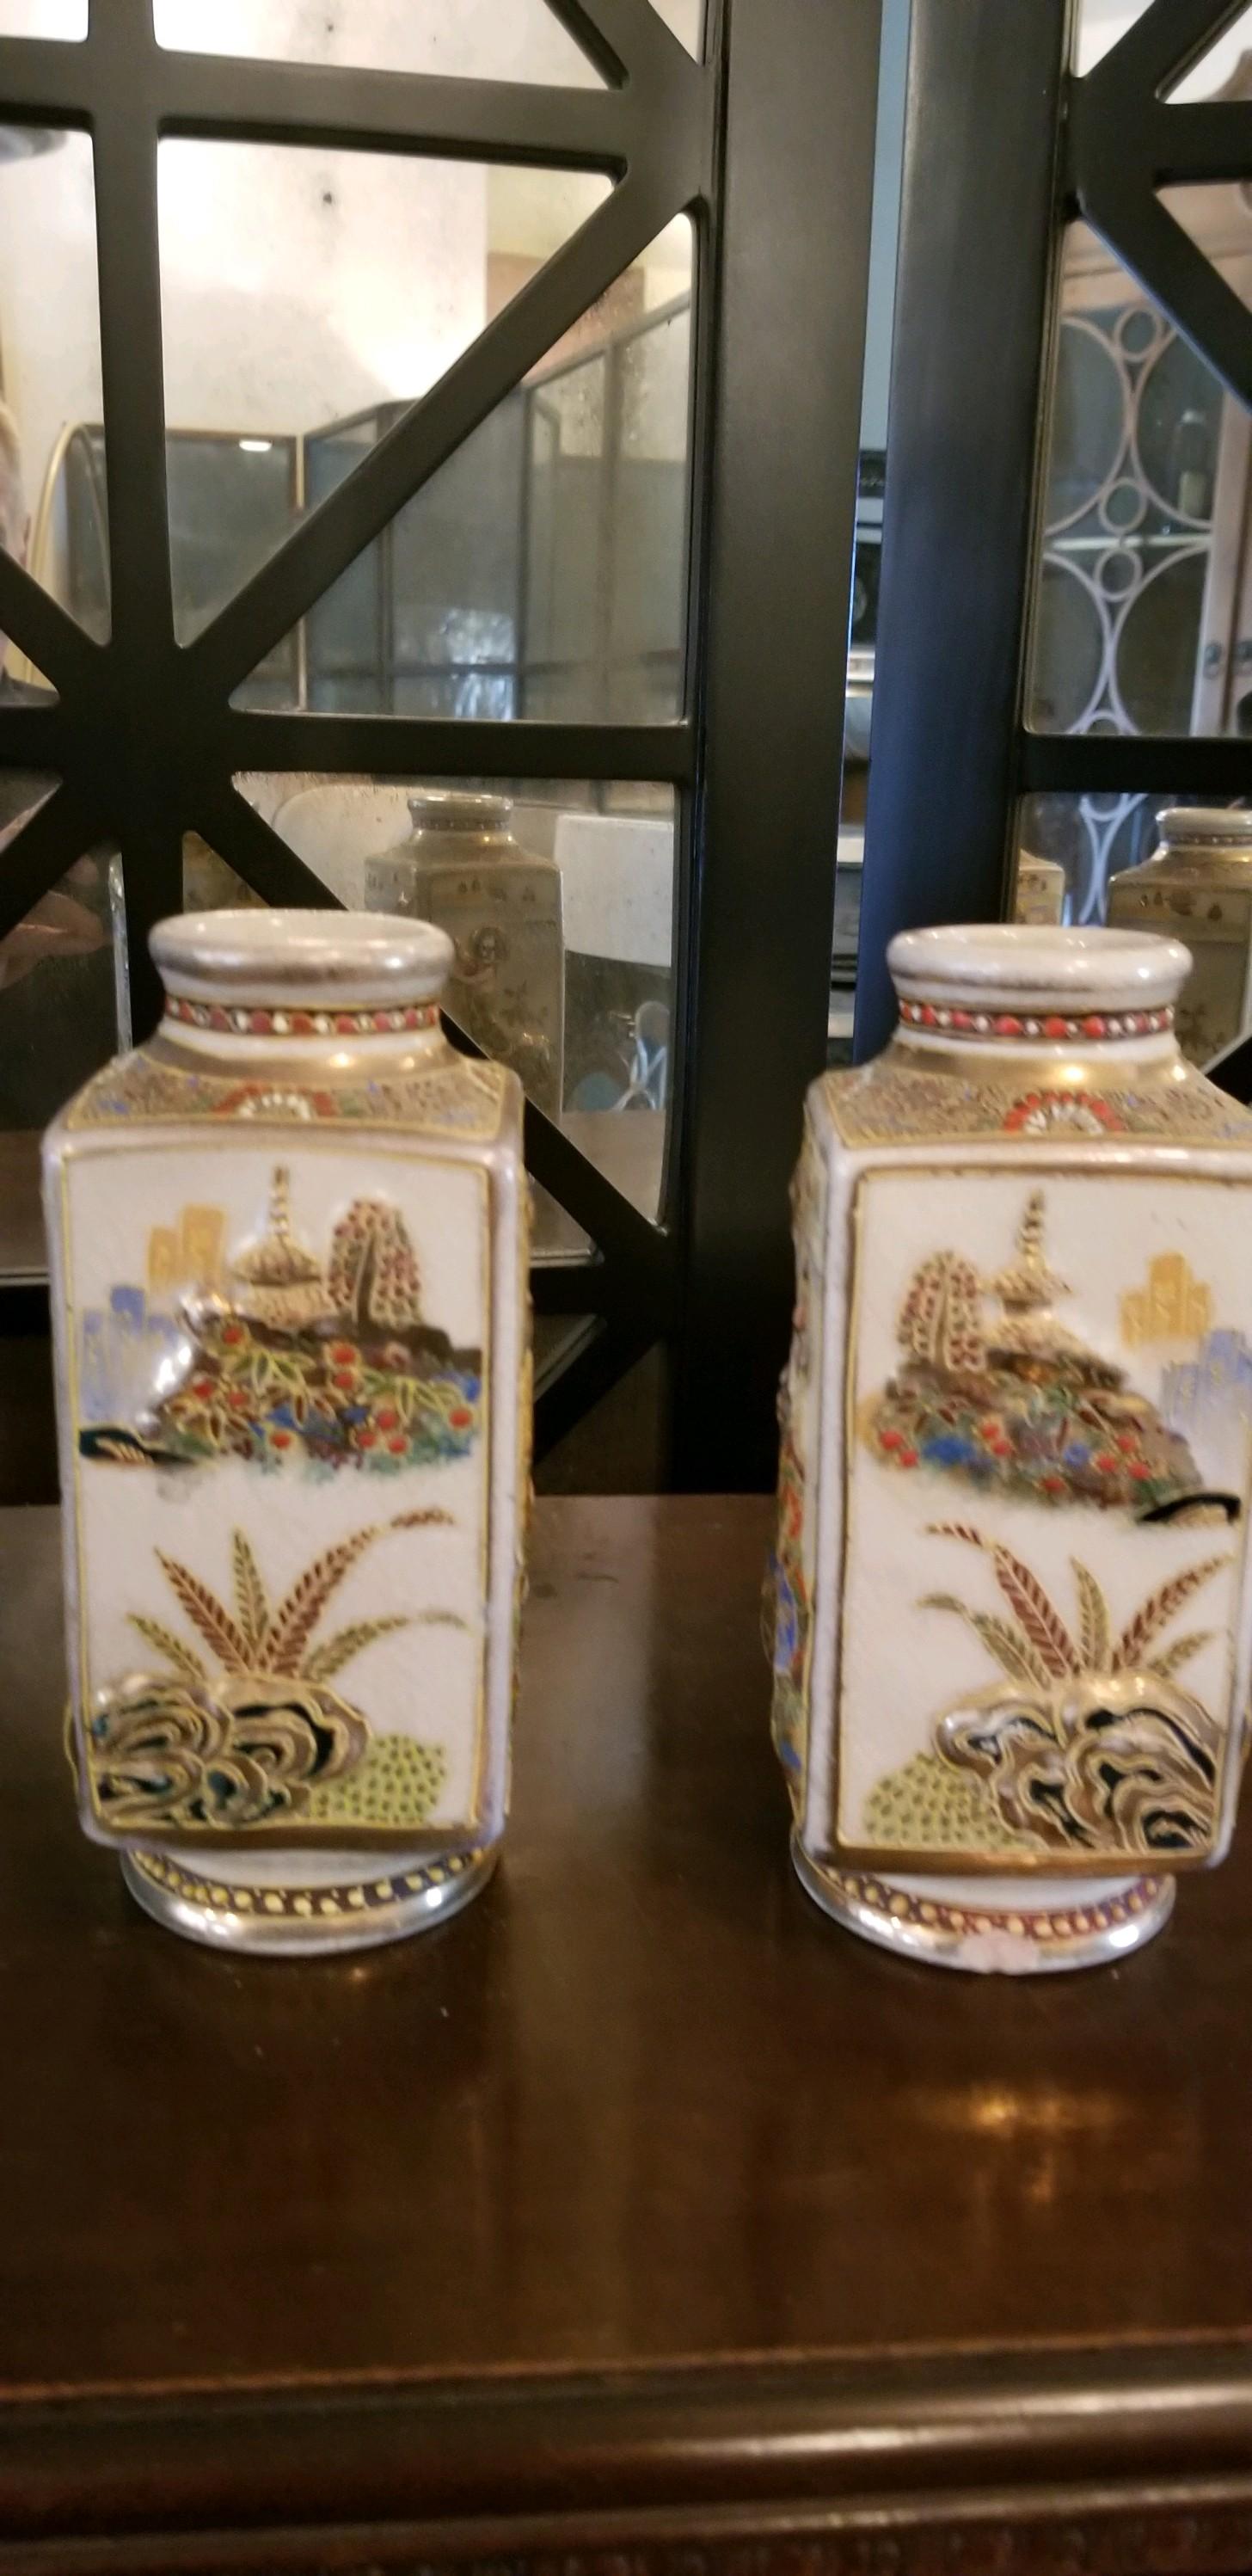 This a rare pair of opposing Chinese vases with gods motif. Late 19th century attribution. Good condition. These vases usually get separated, but these vases stayed intact. Use on your table scape. entry chest or mantel (fireplace). Perfectly at